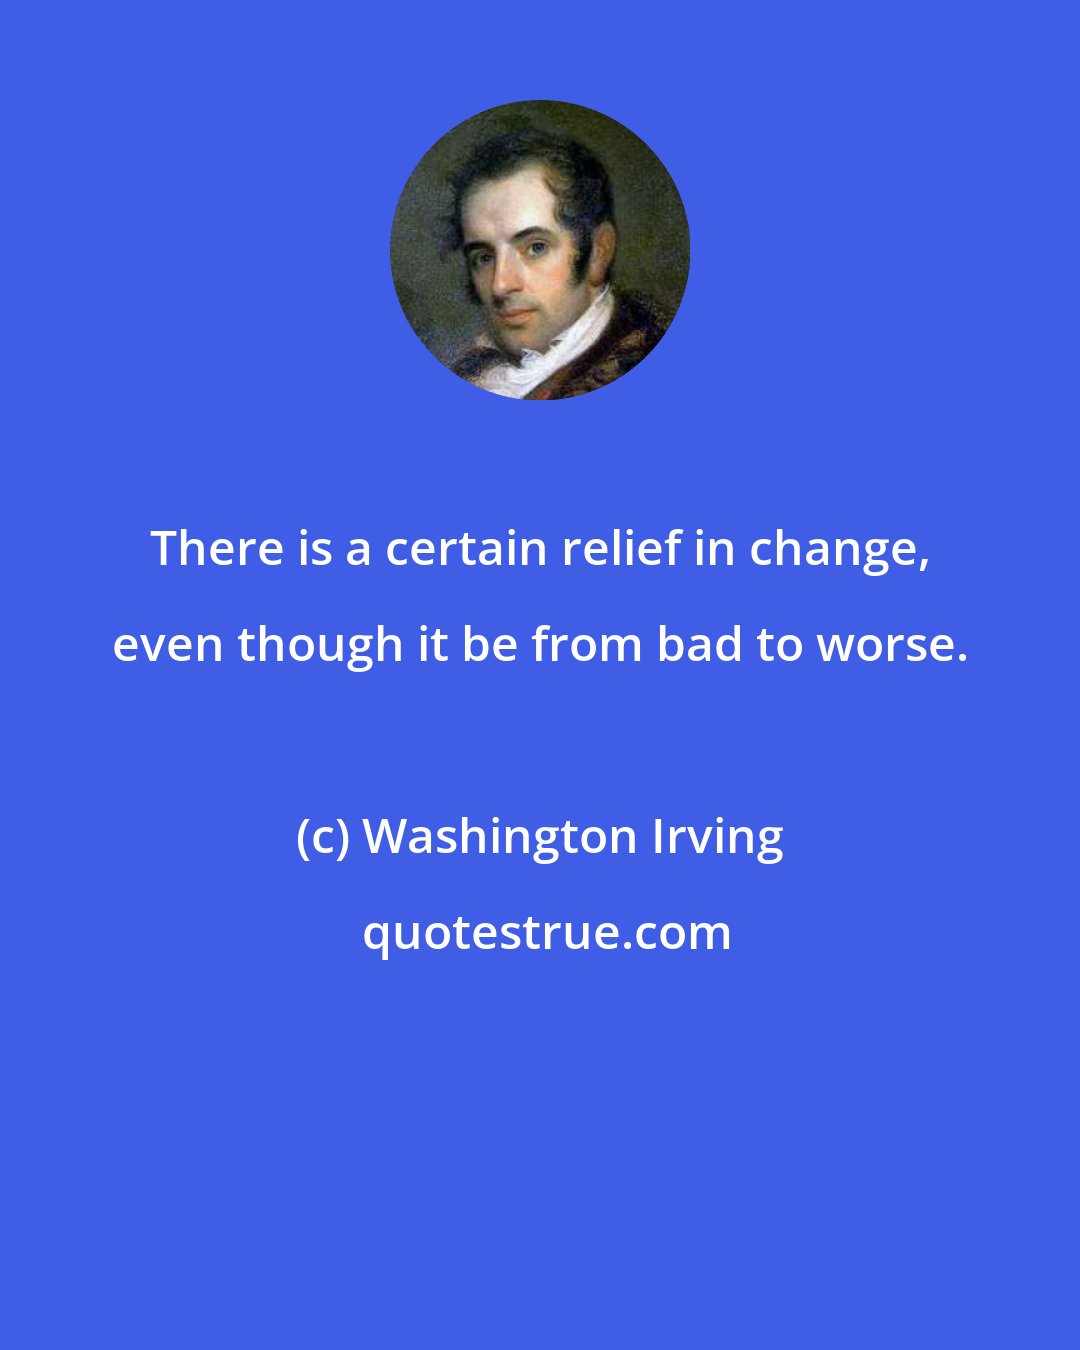 Washington Irving: There is a certain relief in change, even though it be from bad to worse.